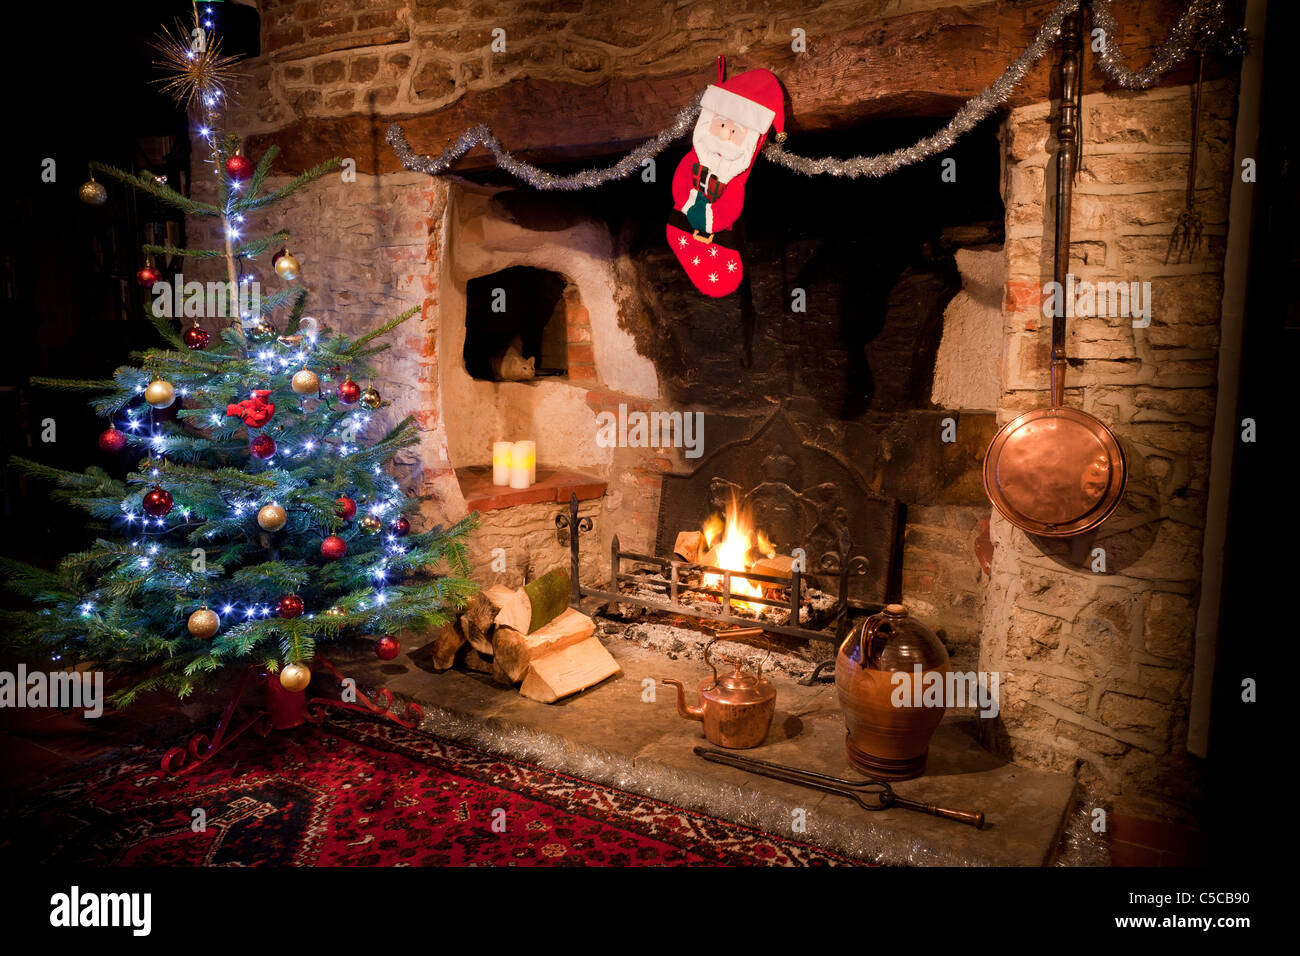 Inglenook fireplace in old house with low burning log fire and decorated Christmas tree, stocking and copper kettle. JMH5162 Stock Photo